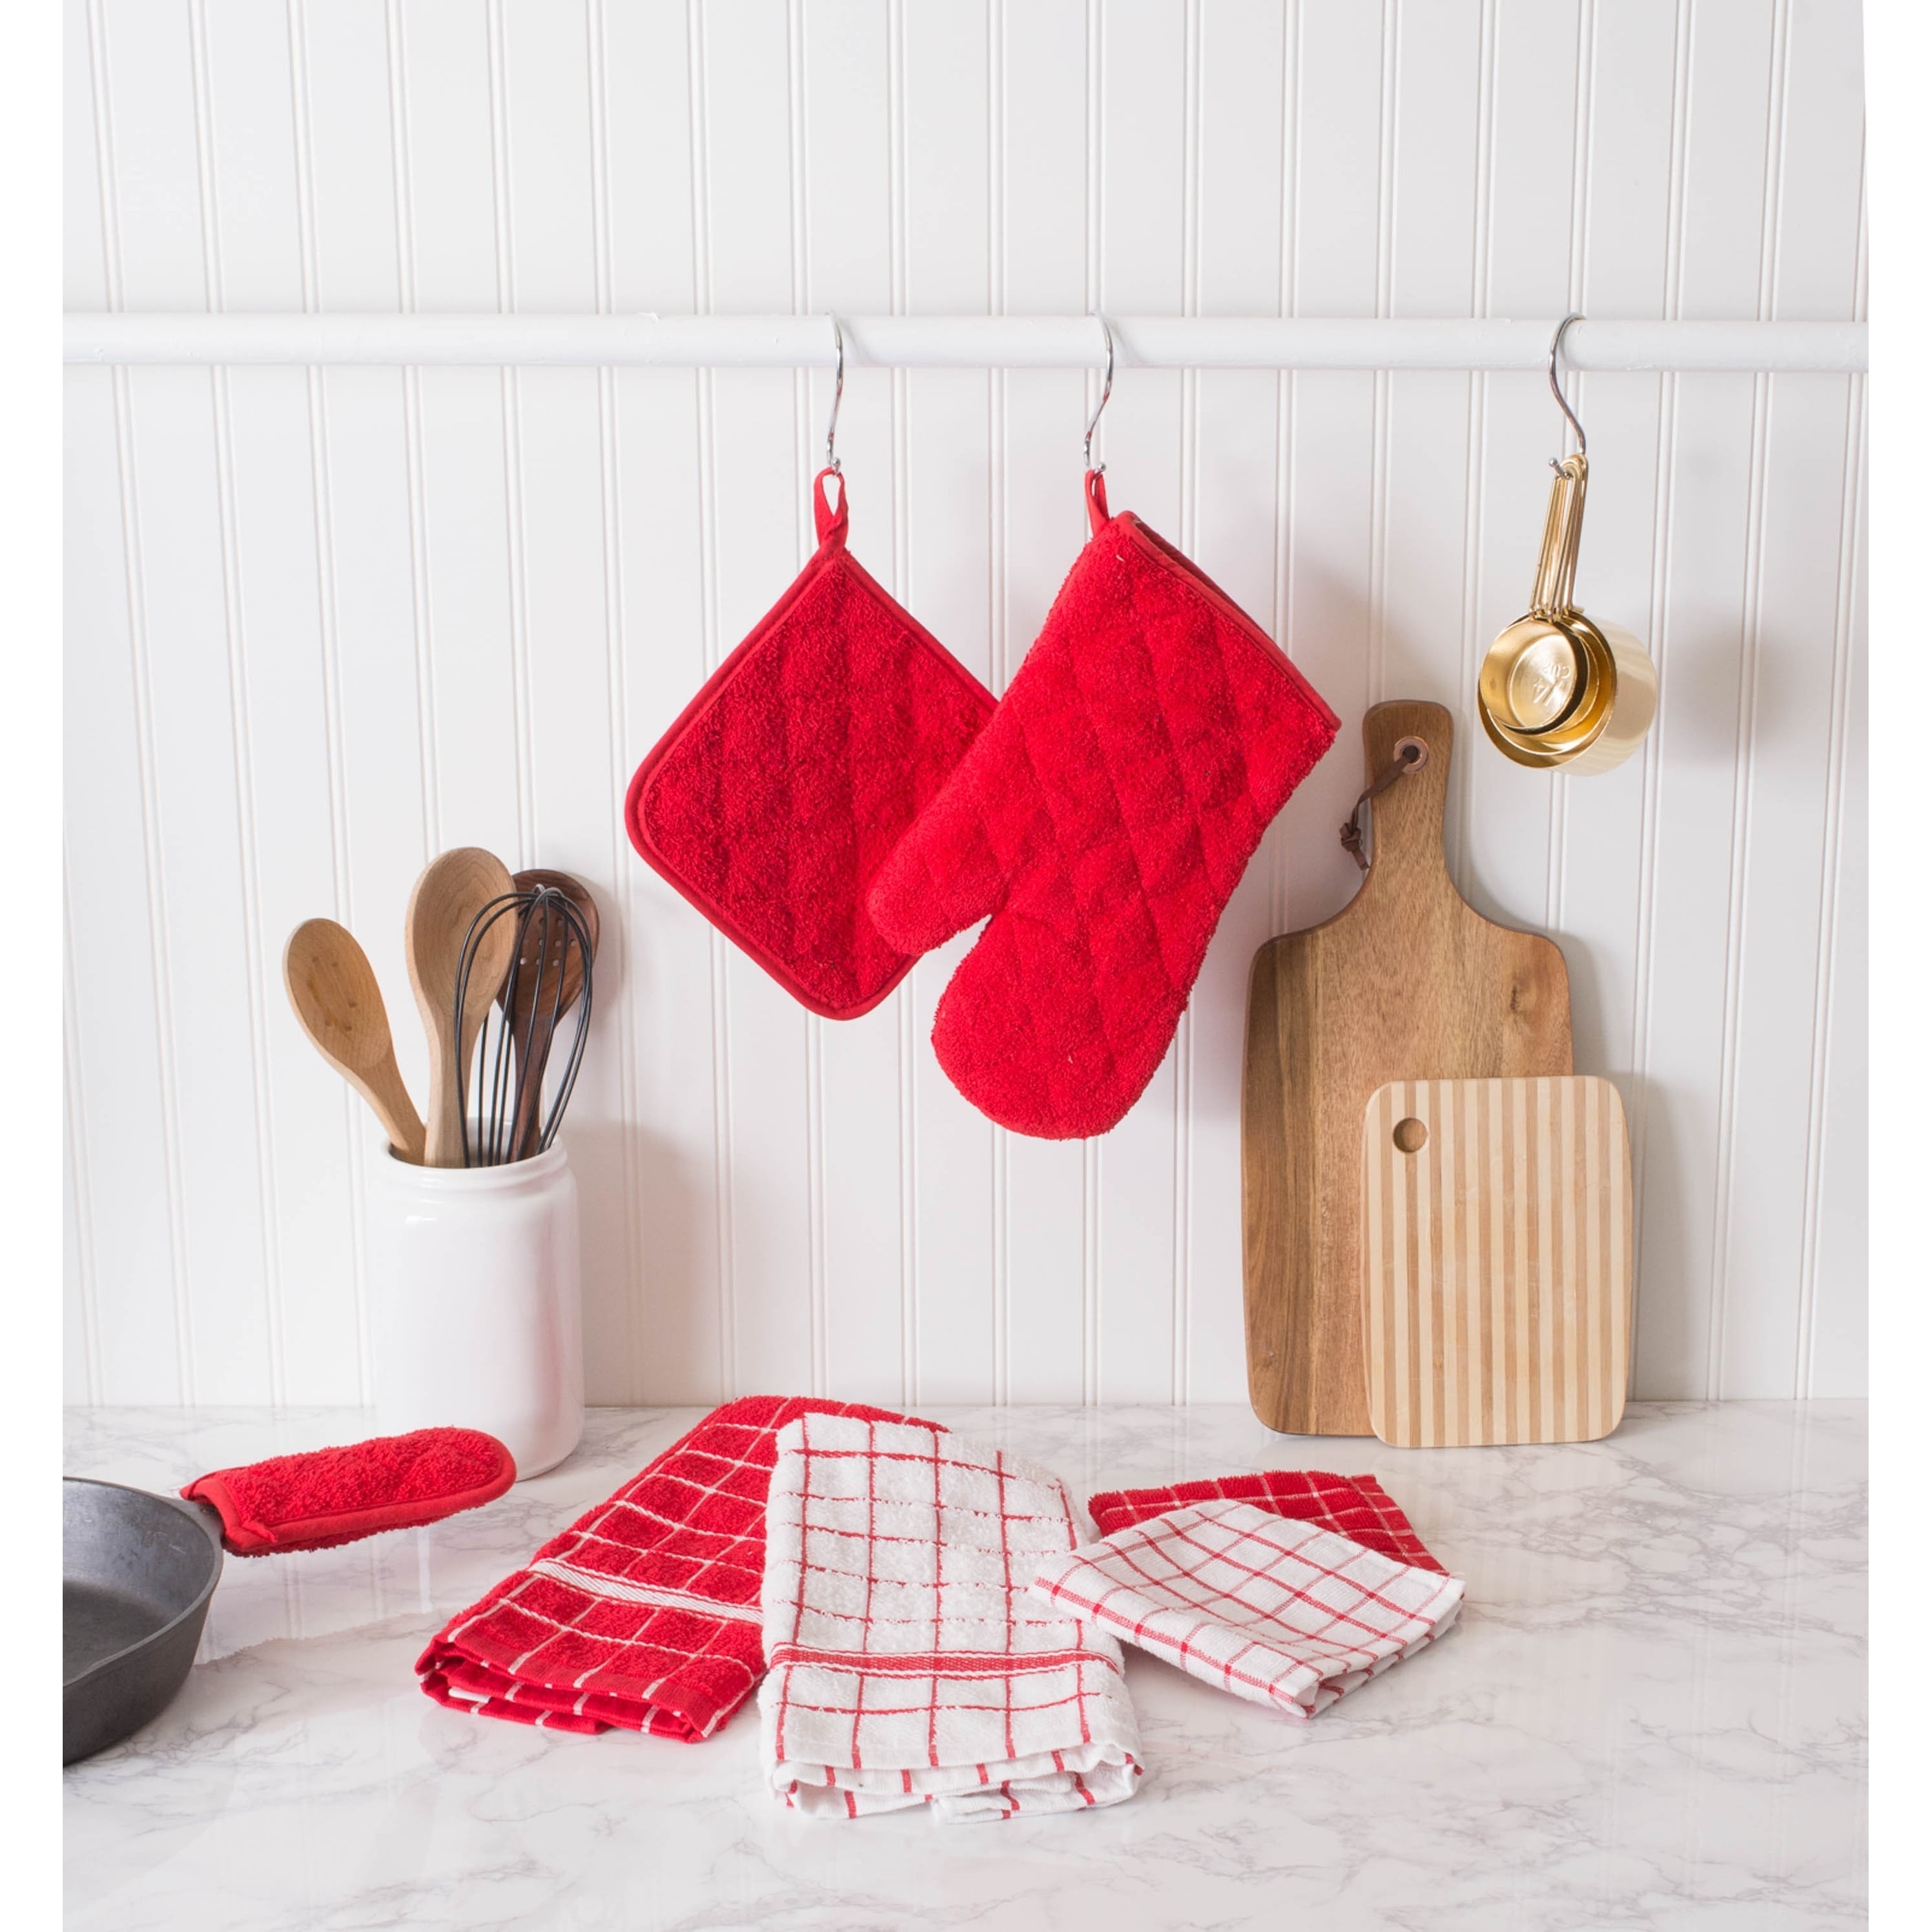 https://ak1.ostkcdn.com/images/products/10517541/Windowpane-Dishtowel-Set-of-4-09dd6e1d-d8d2-49a4-a410-55b92cac3e24.jpg